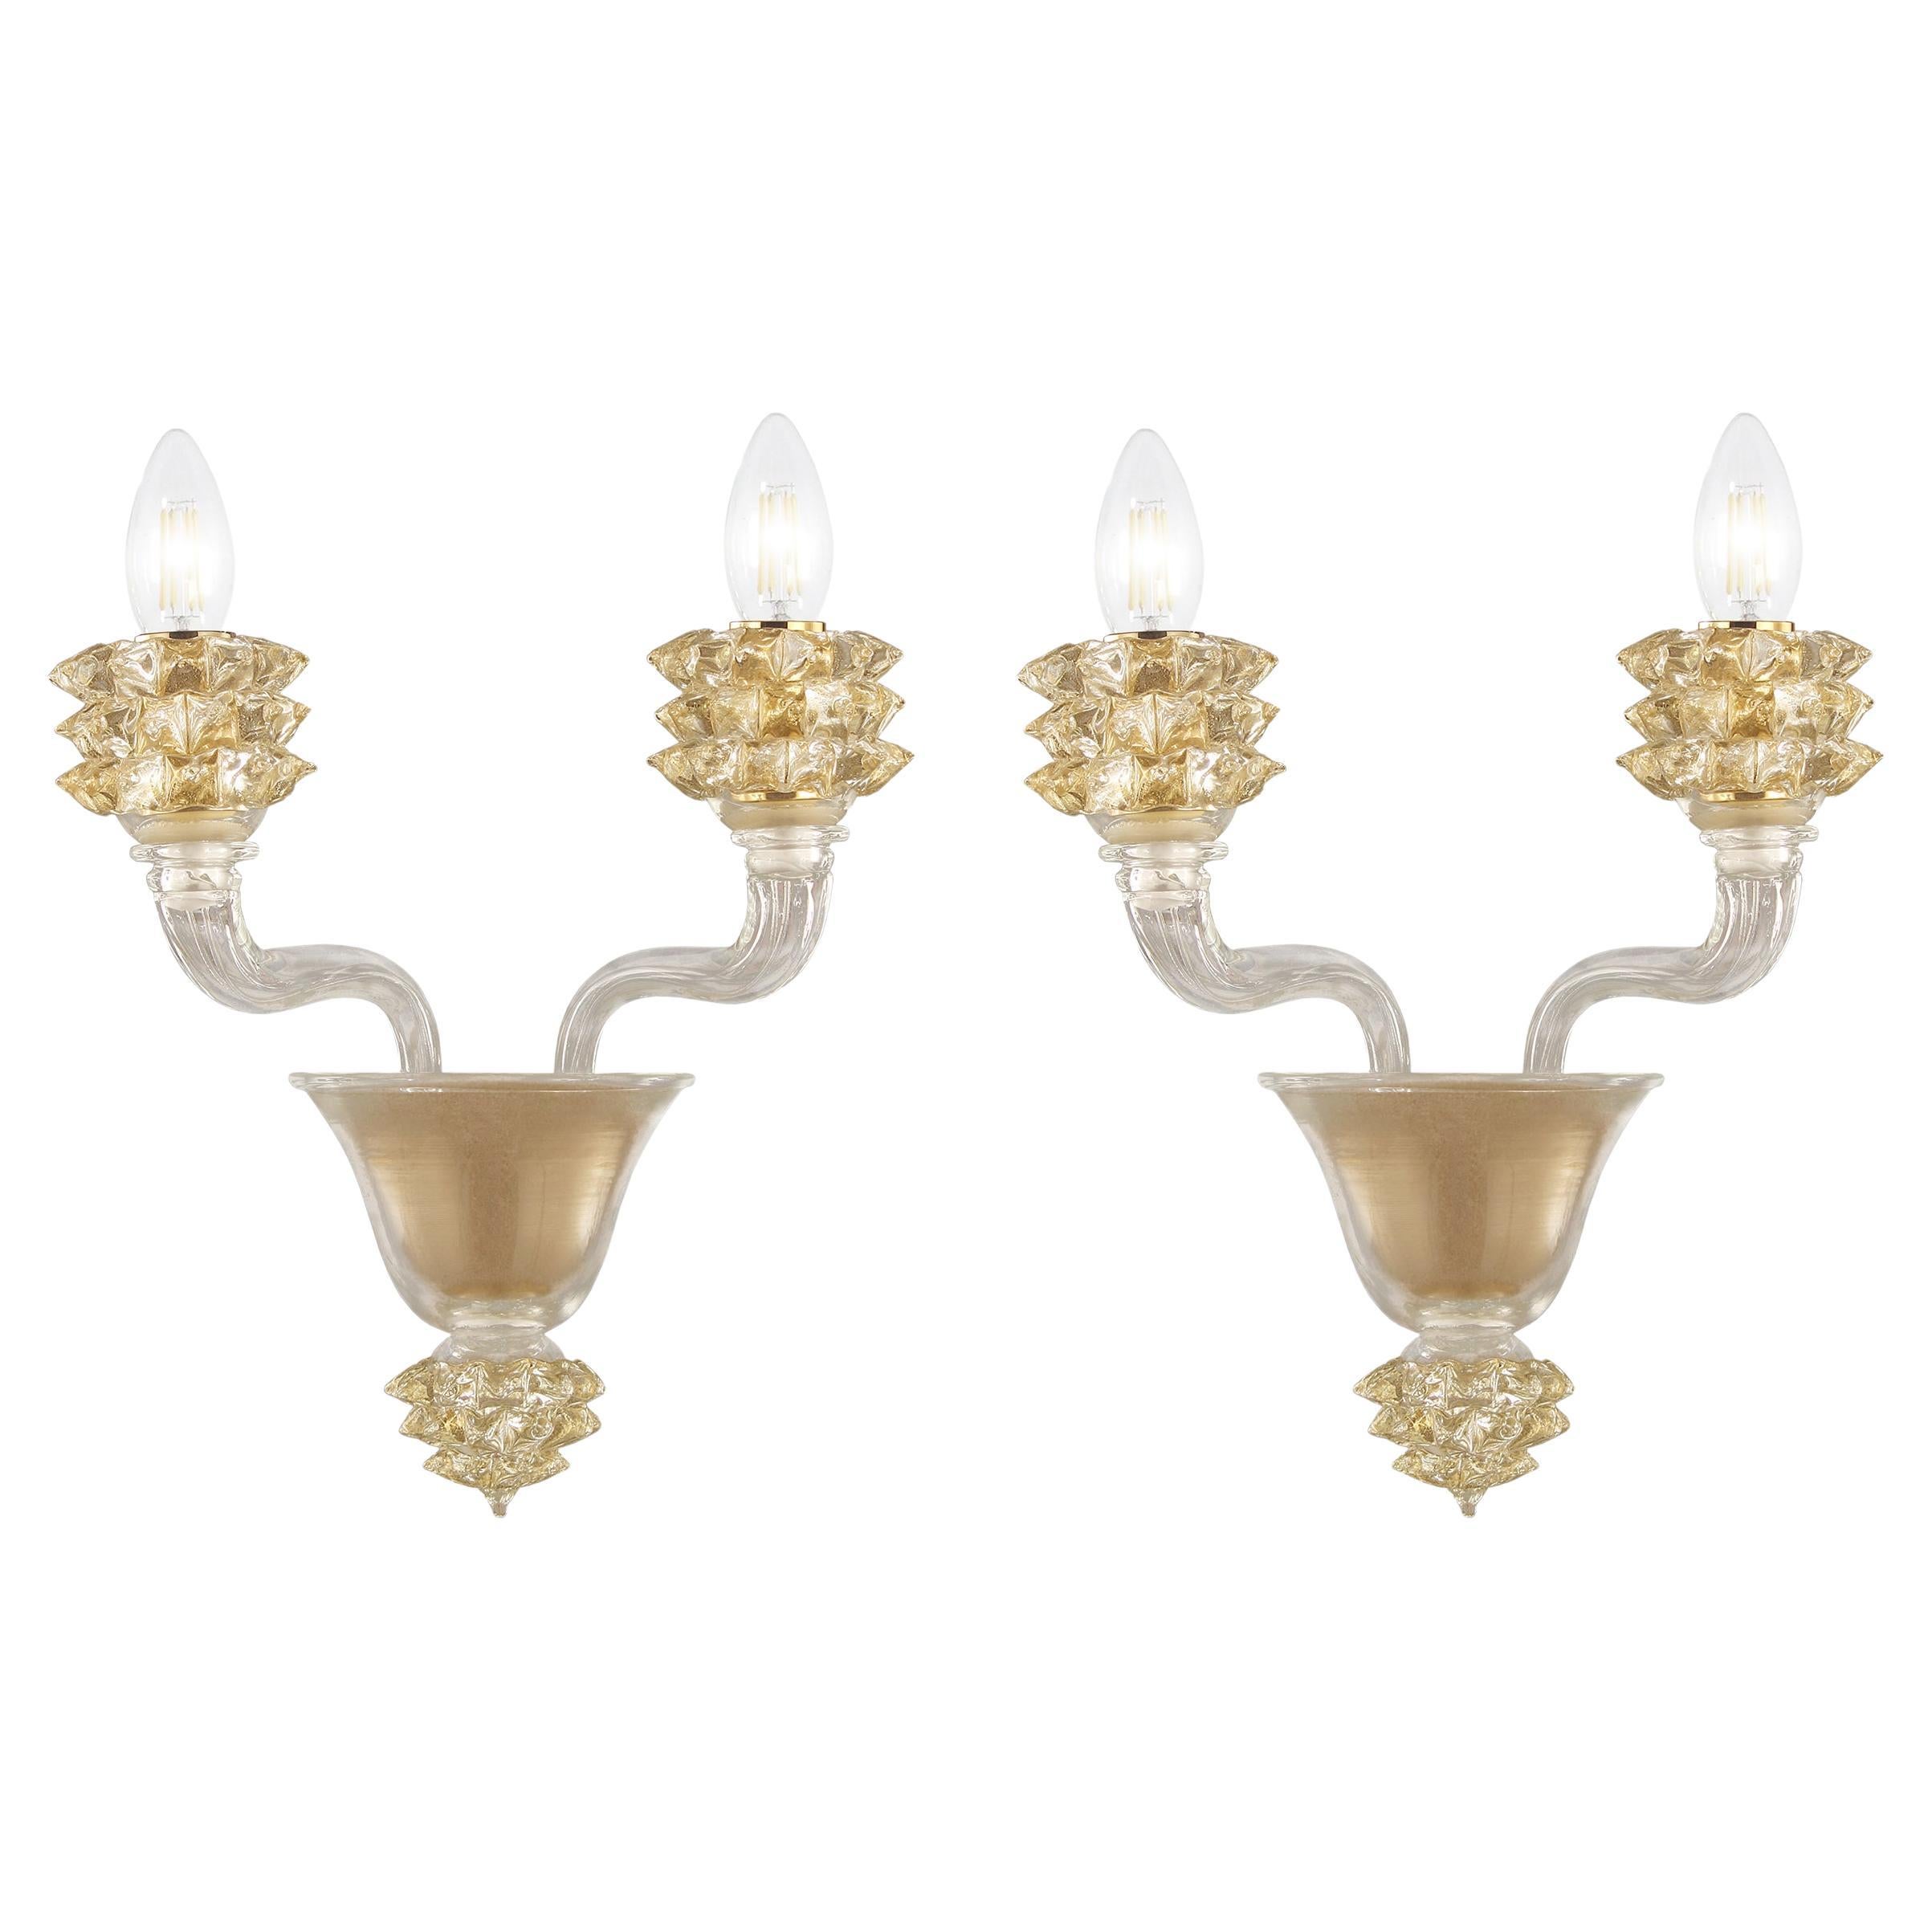 Set of 2 Sconce 2 Arms clear Murano Glass Gold Rostri Details by Multiforme